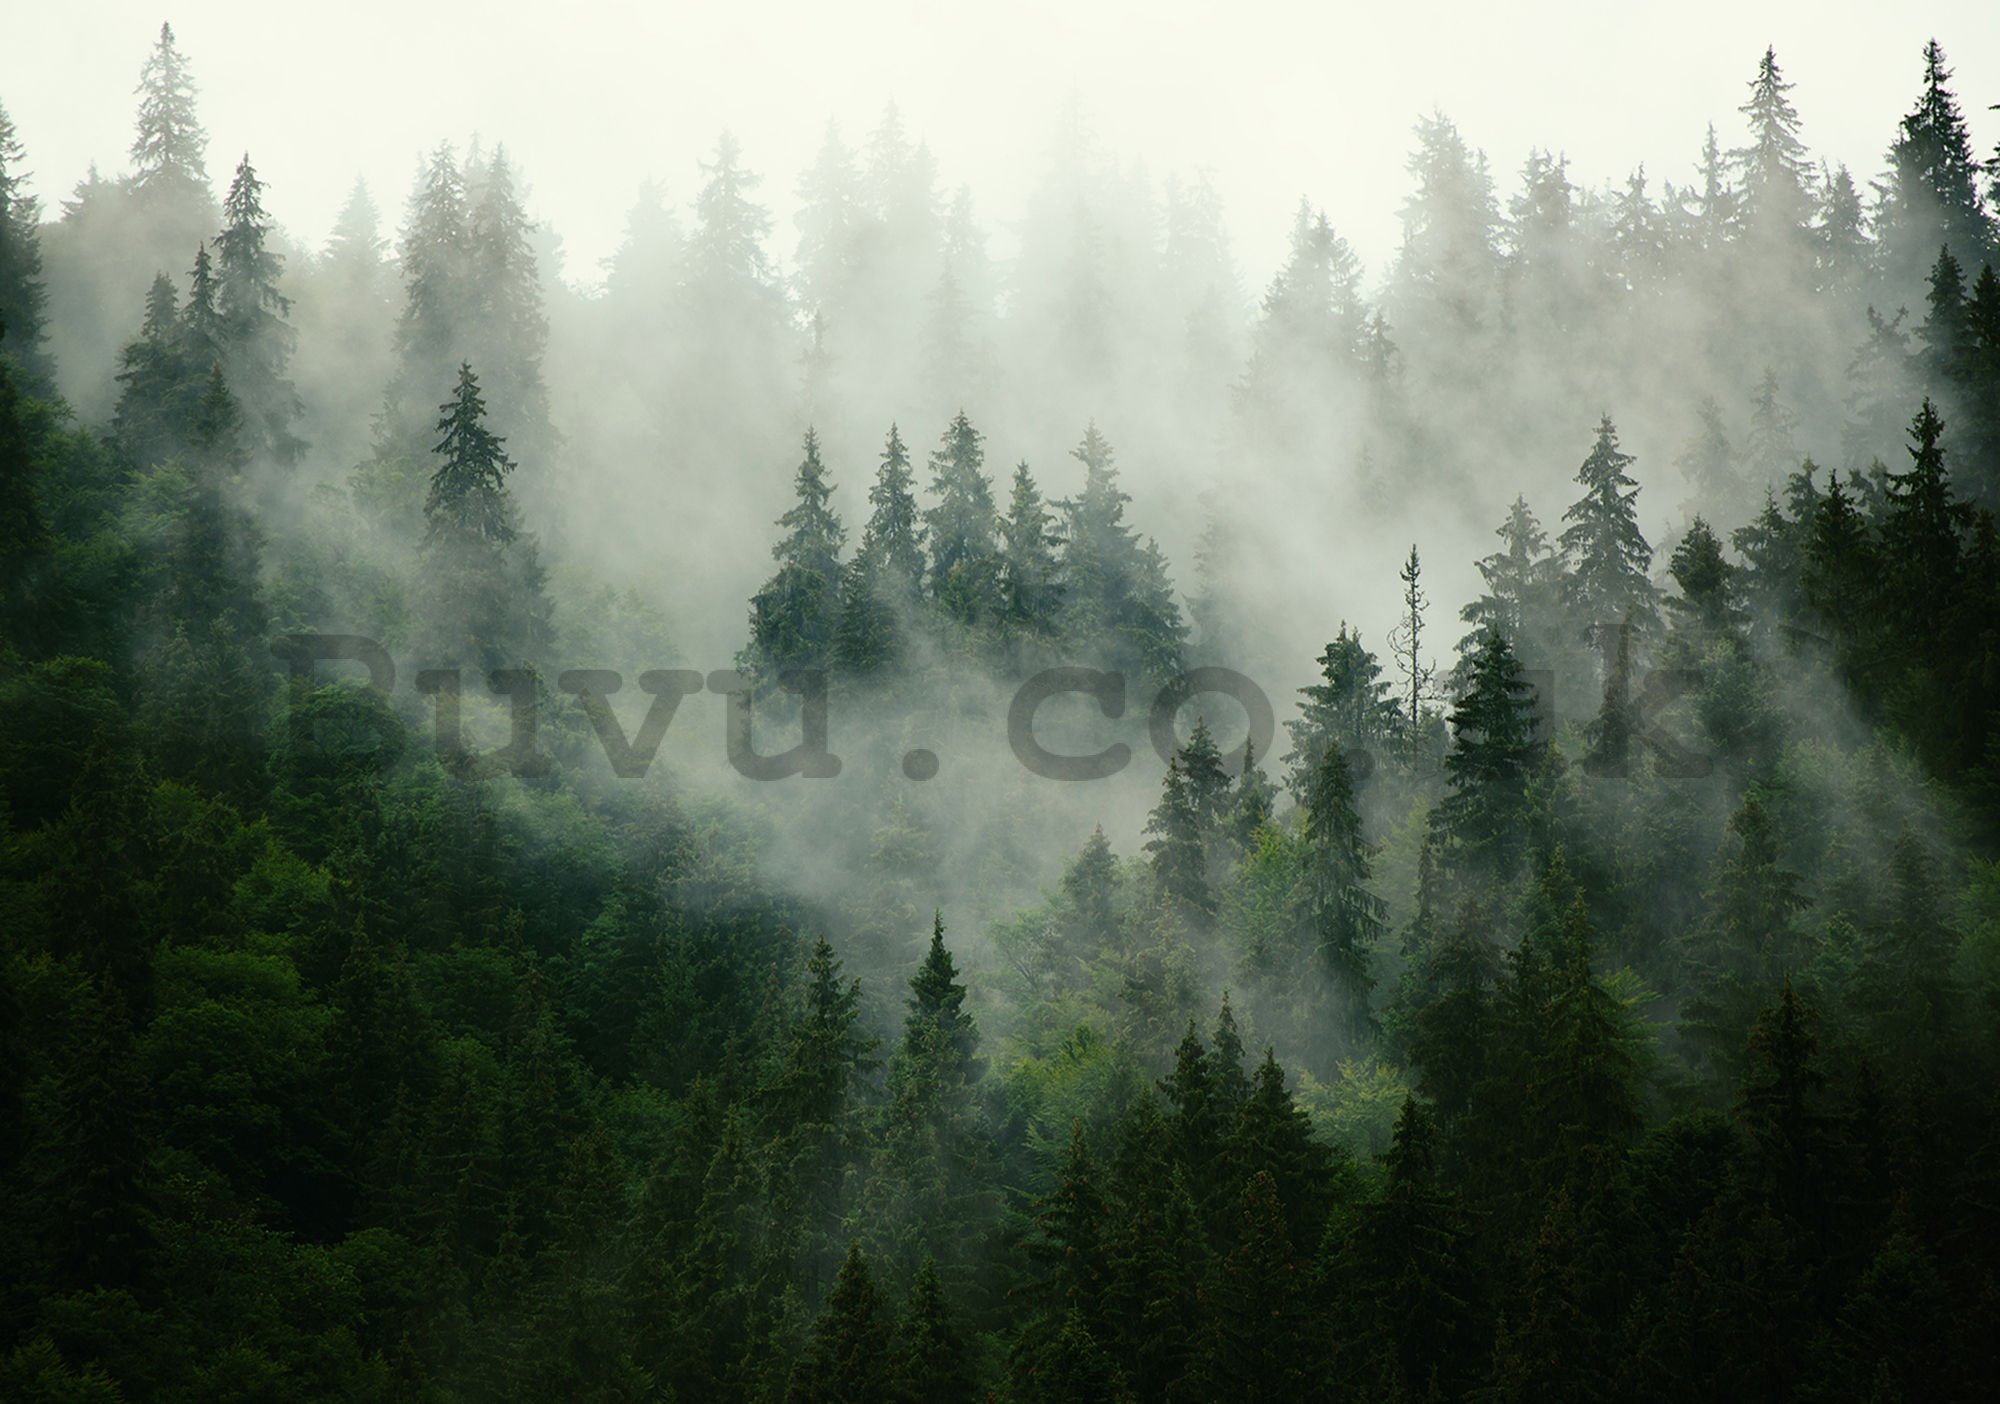 Wall mural vlies: Fog over the forest (1) - 184x254 cm